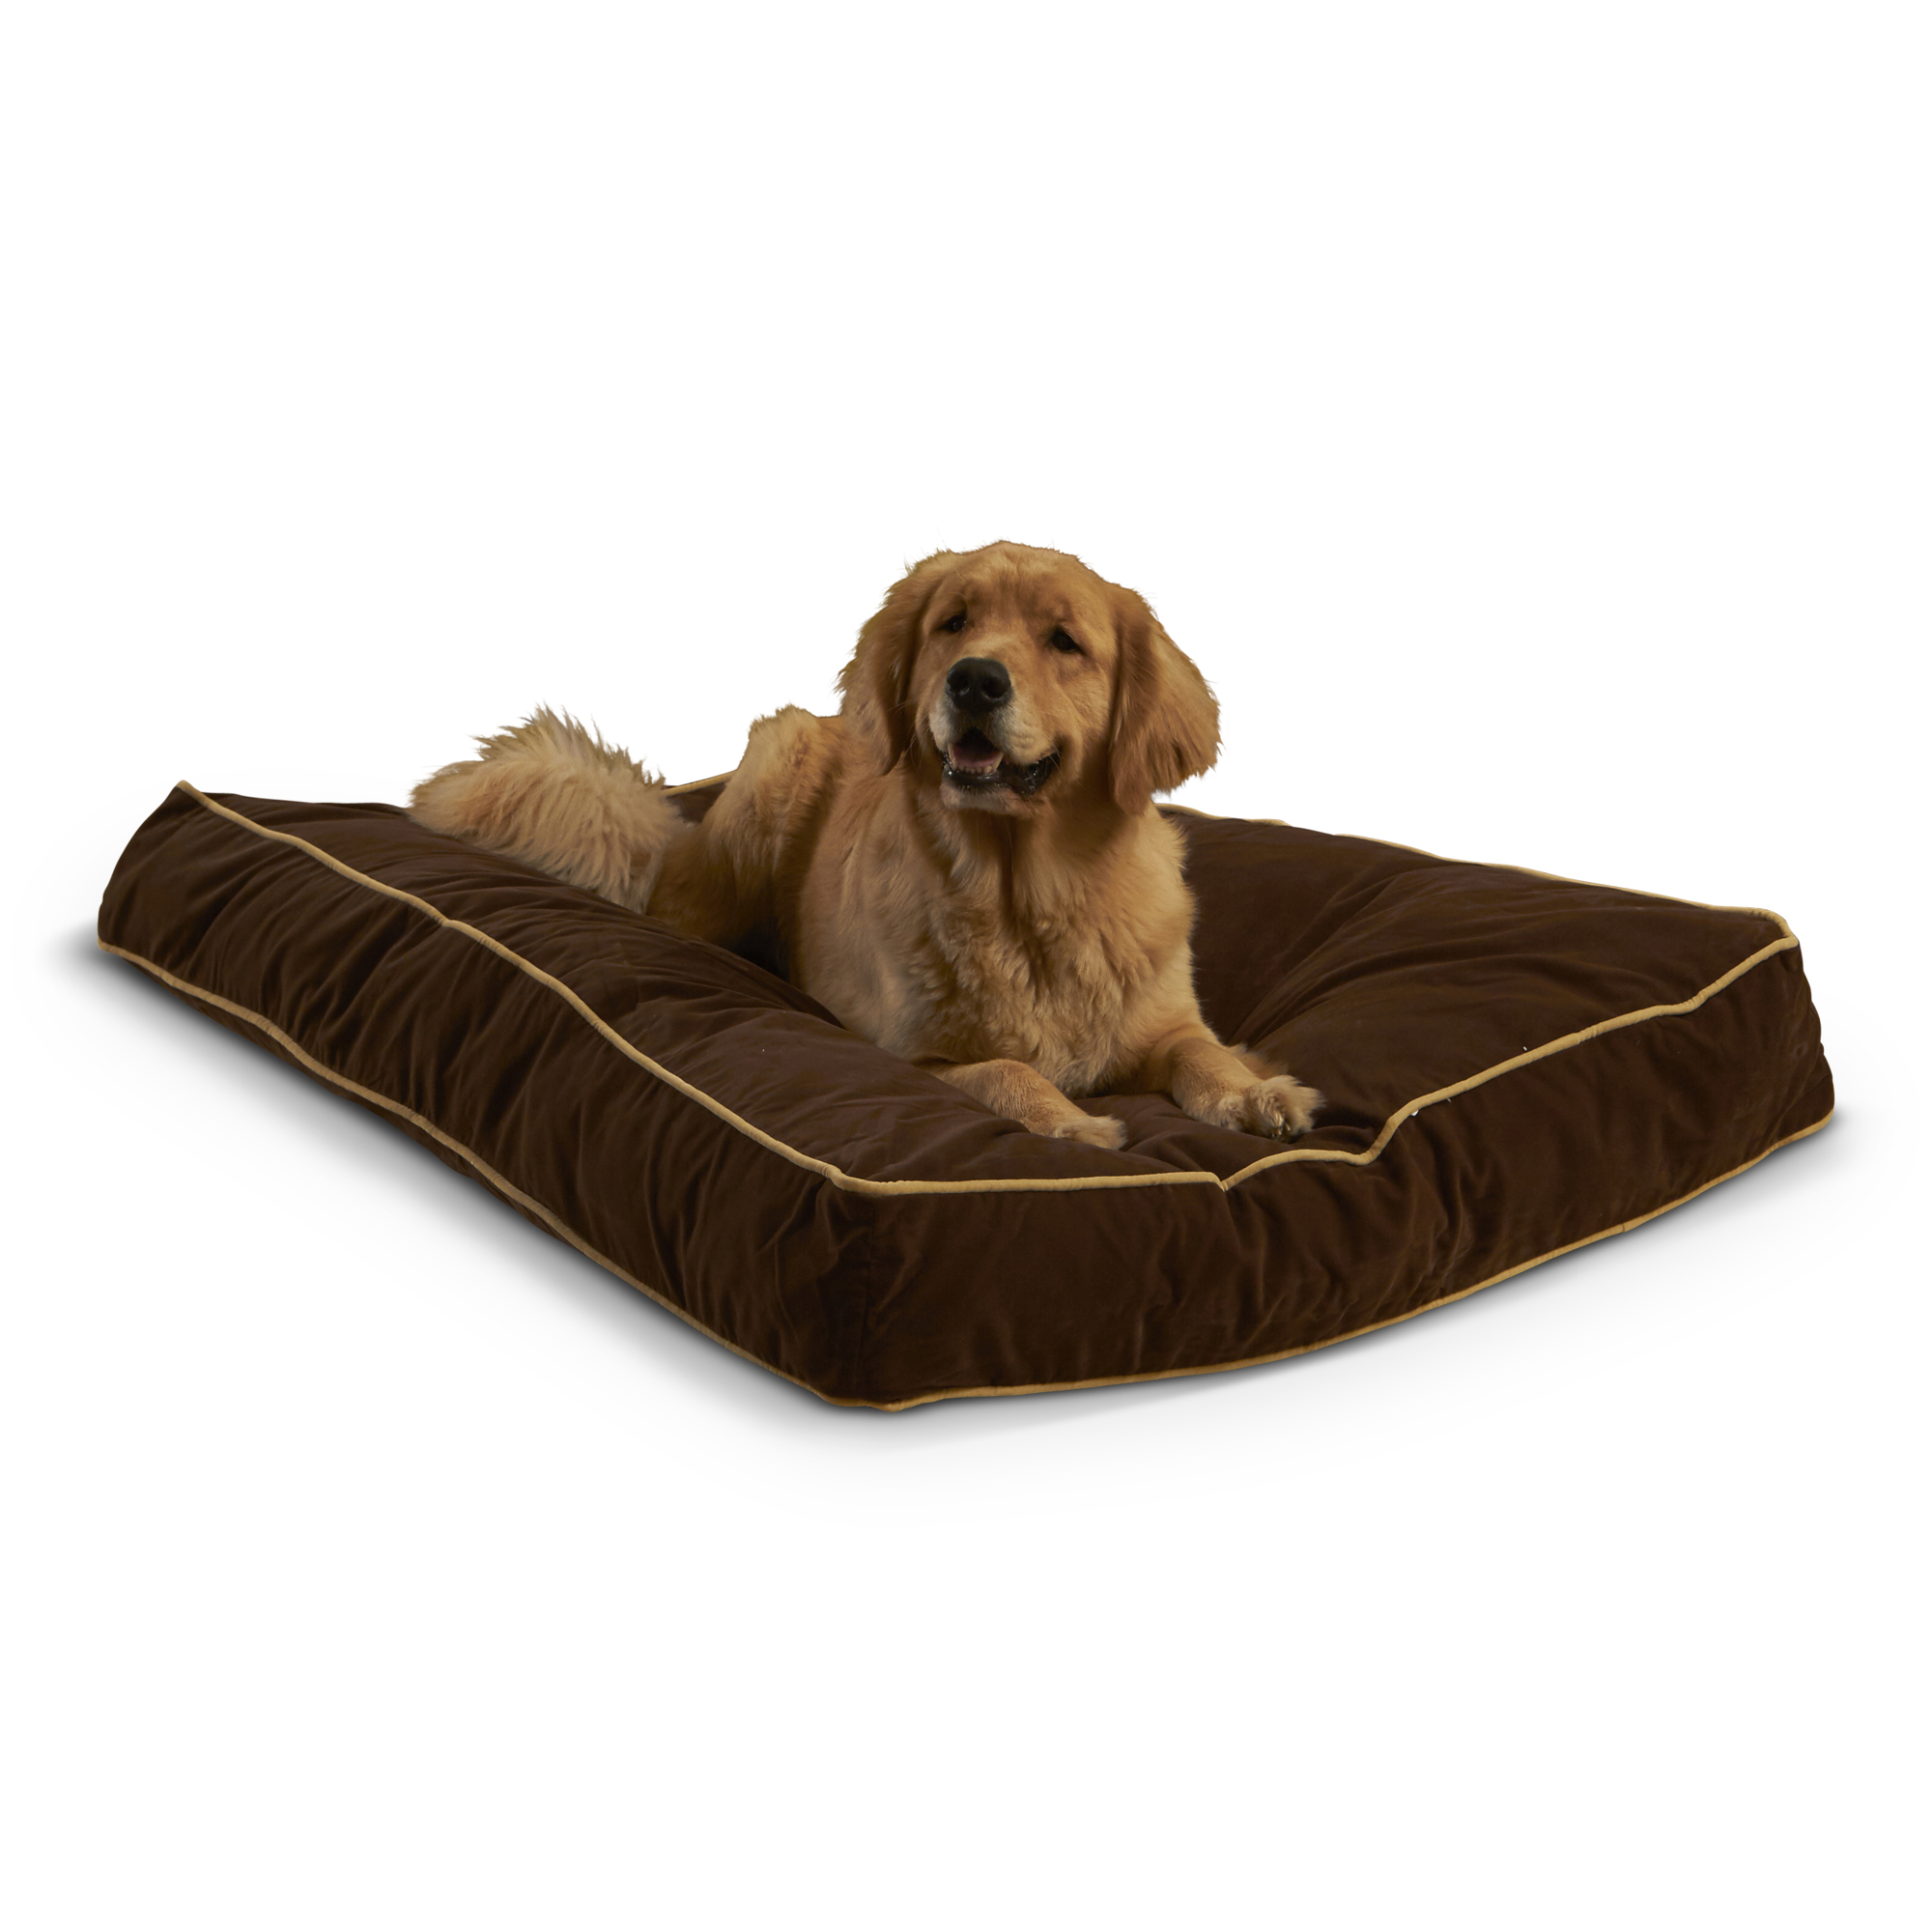 Happy Hounds Buster Rectangle Pillow Style Dog Bed, Cocoa, Large (48 x 36 in.) - image 1 of 8